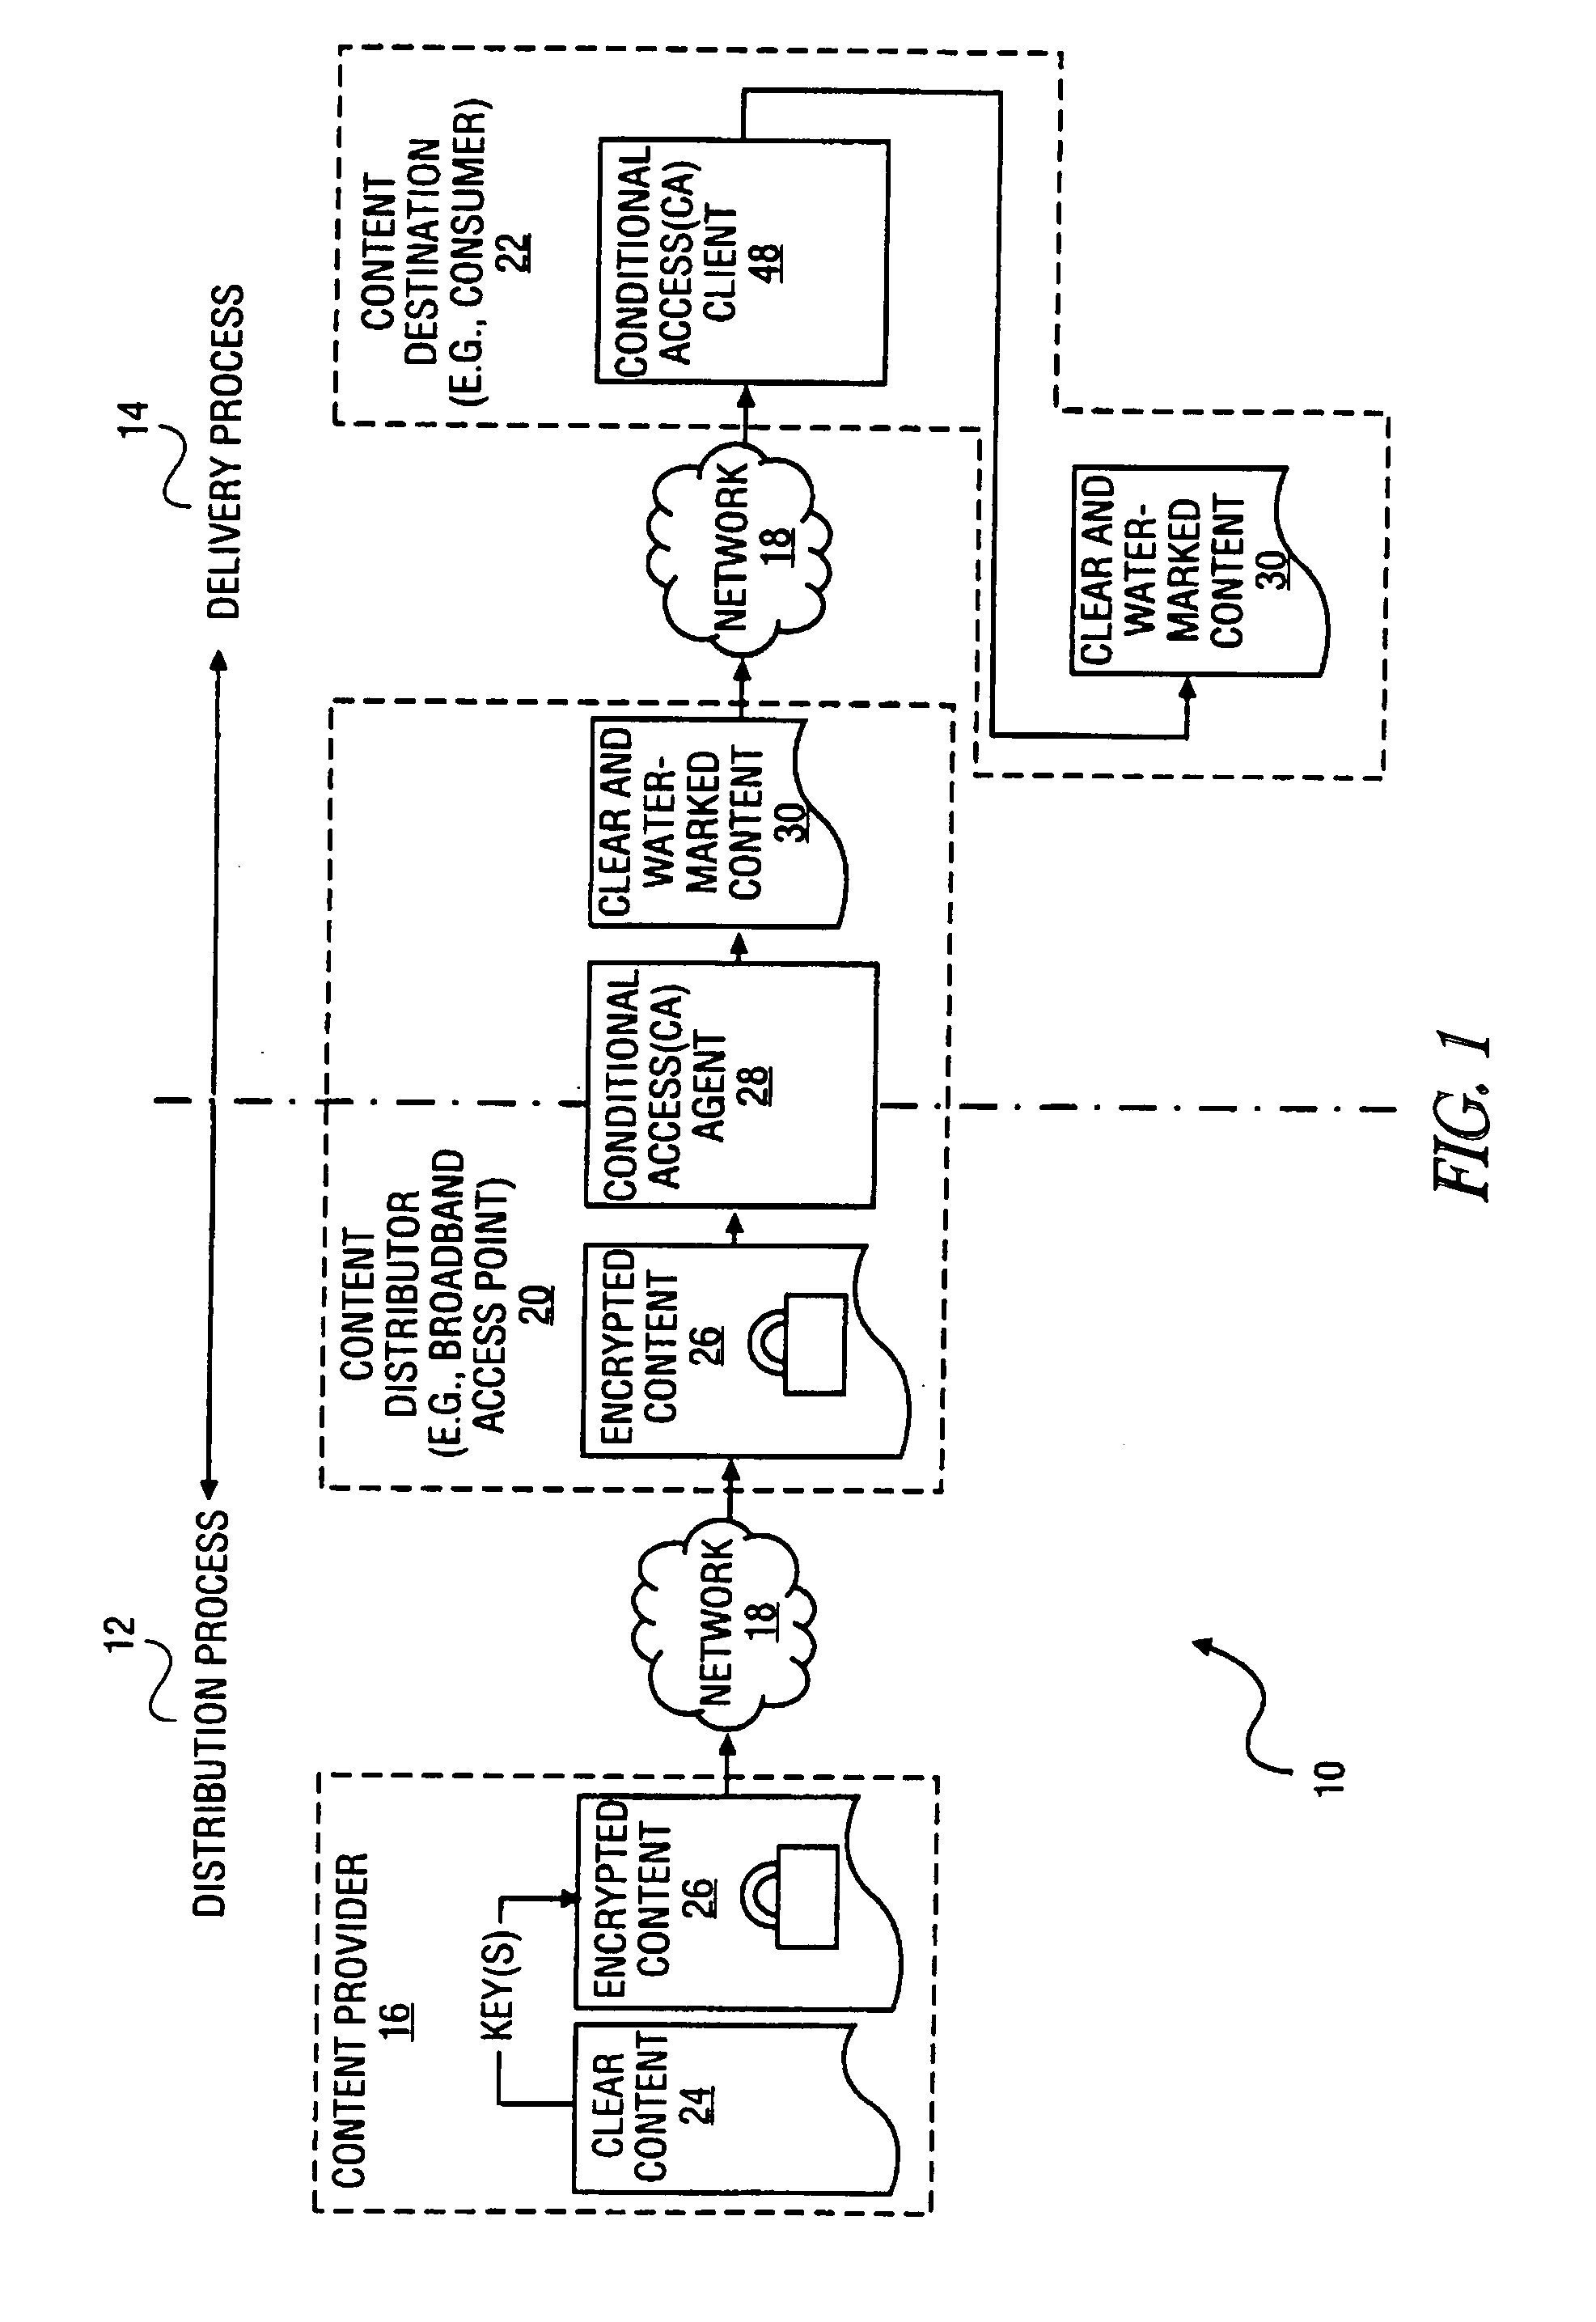 Method and system to dynamically present a payment gateway for content distributed via a network